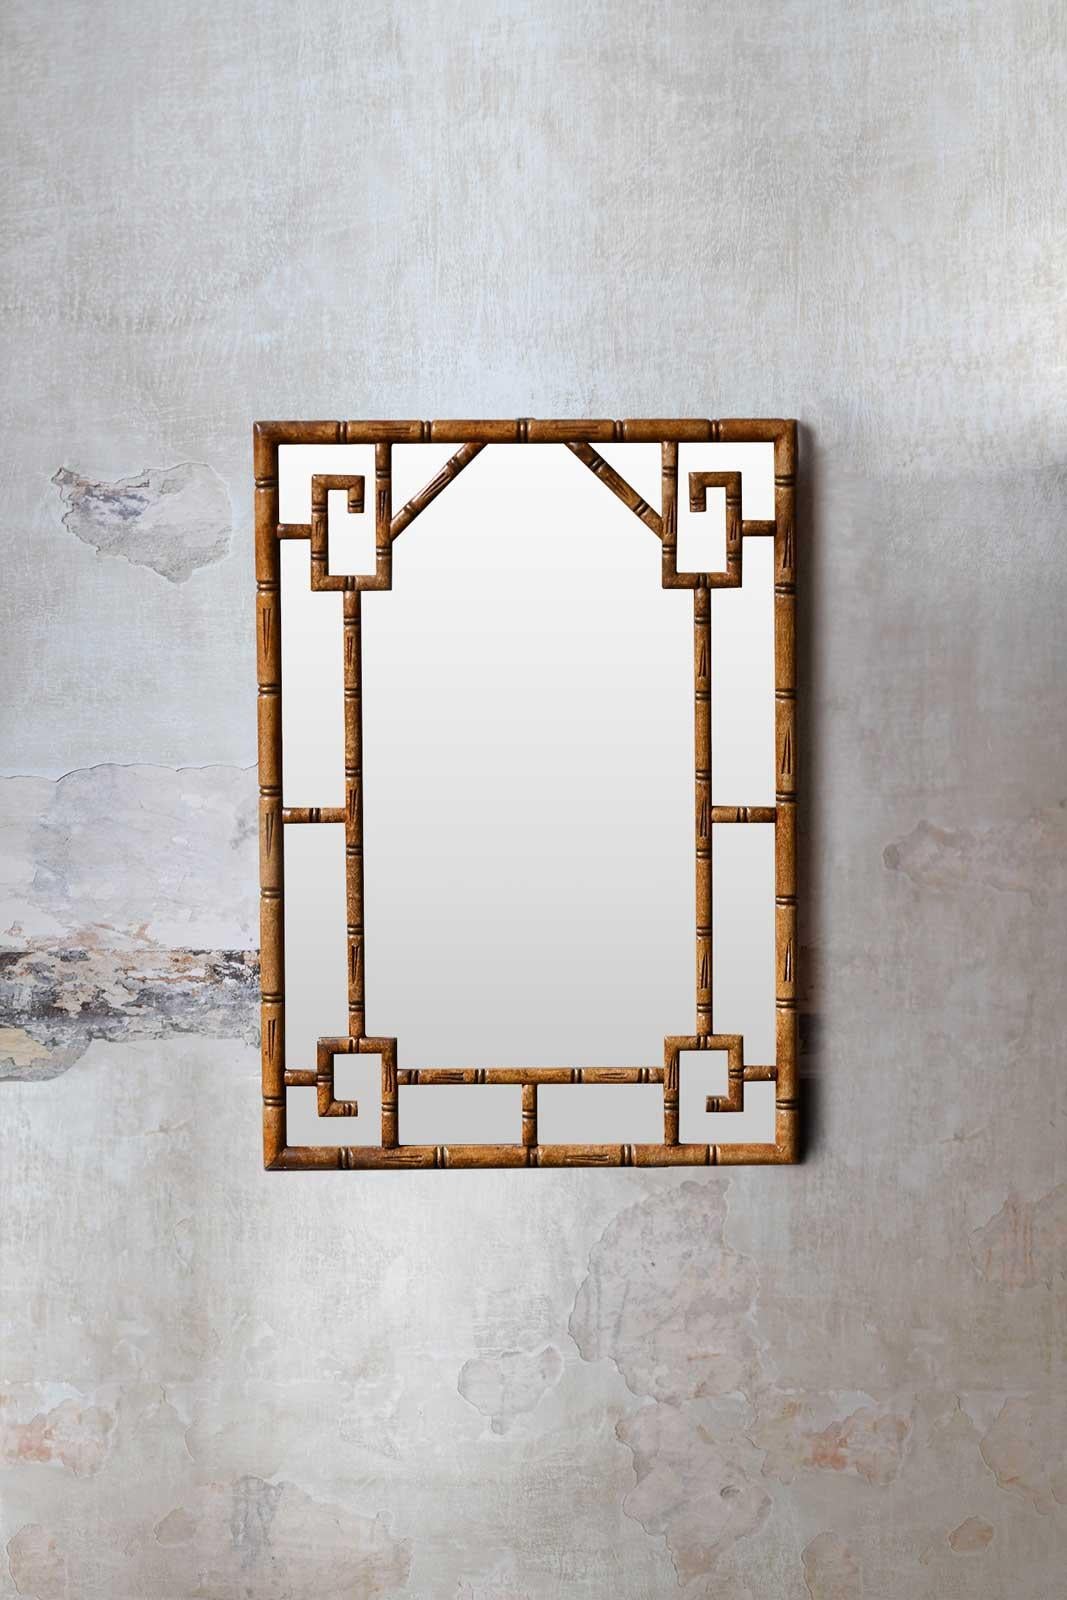 Mirror with geometric patterns in carved bamboo-like wood from the 1920s.
Product details
Dimensions: 66 W x 93 H x 3 D cm